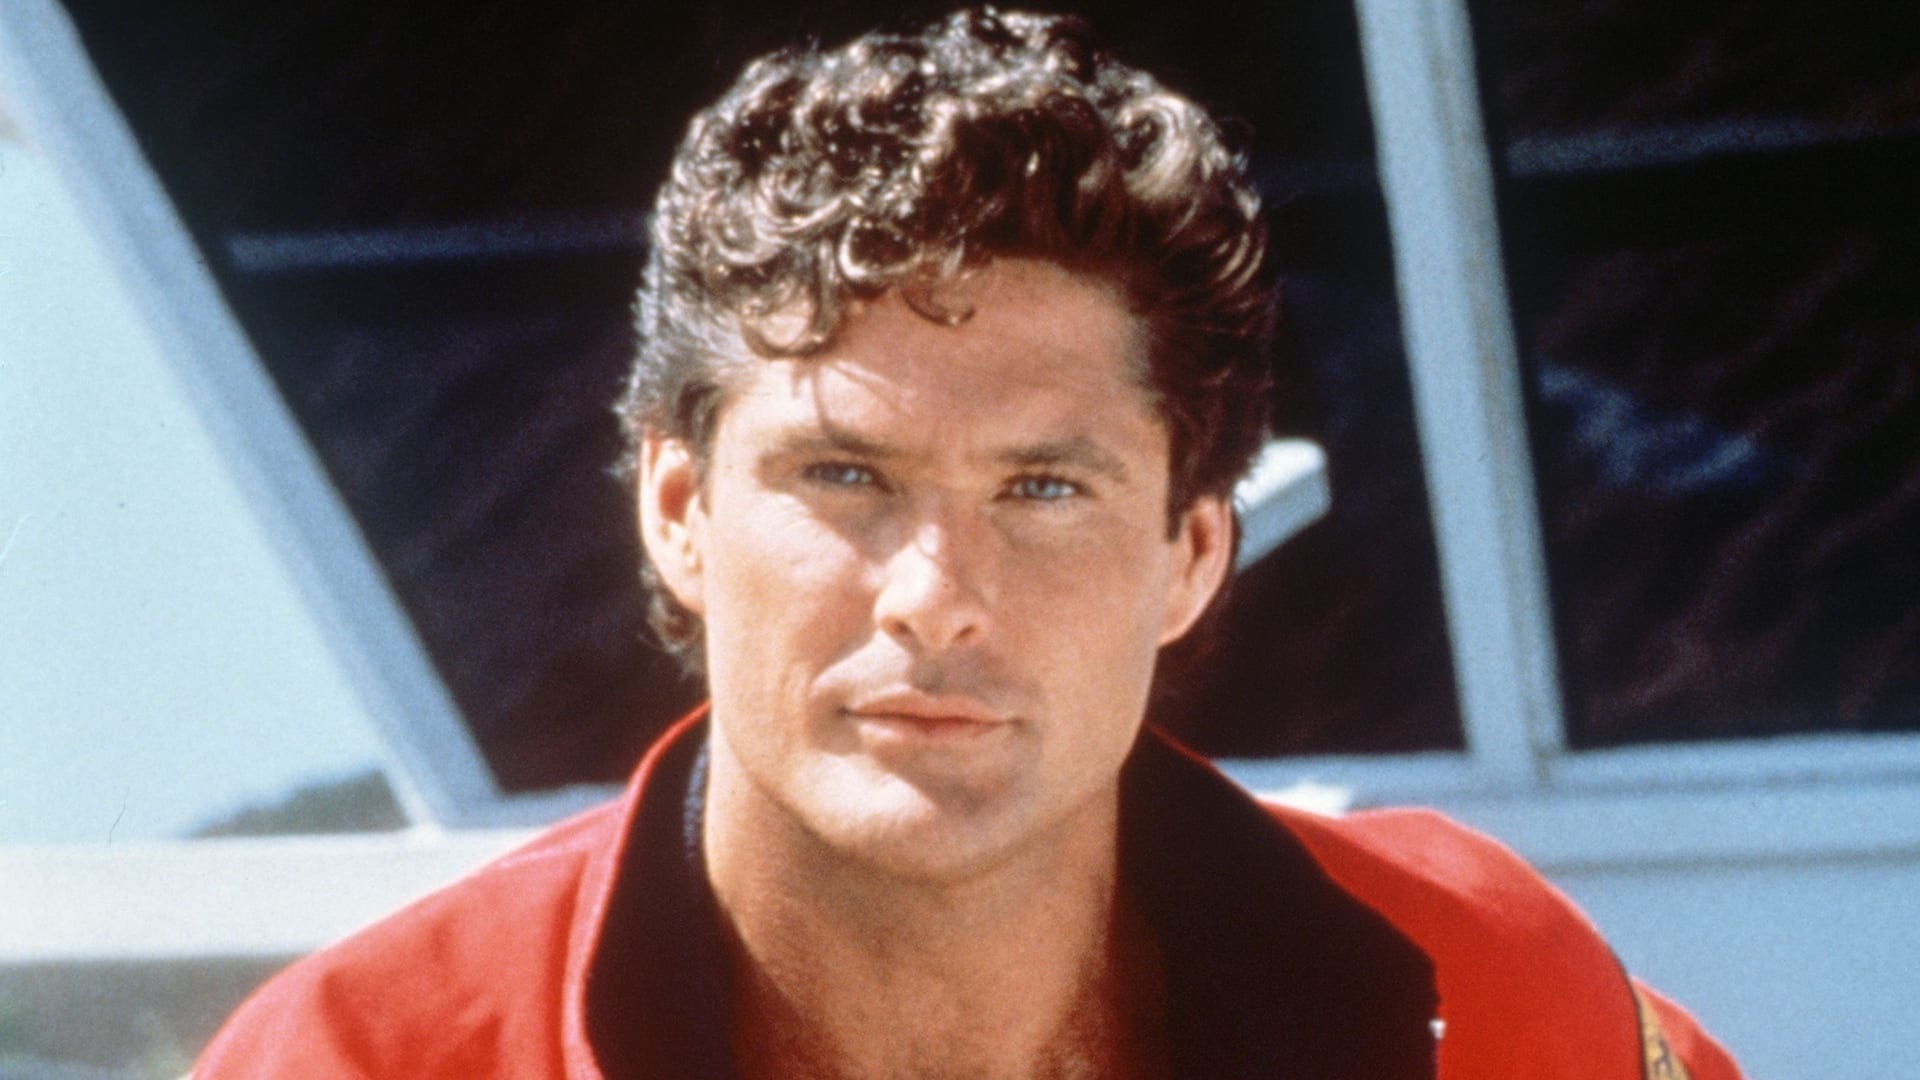 David Hasselhoff: Mitch Buchannon, A fictional character from the television series Baywatch. 1920x1080 Full HD Wallpaper.